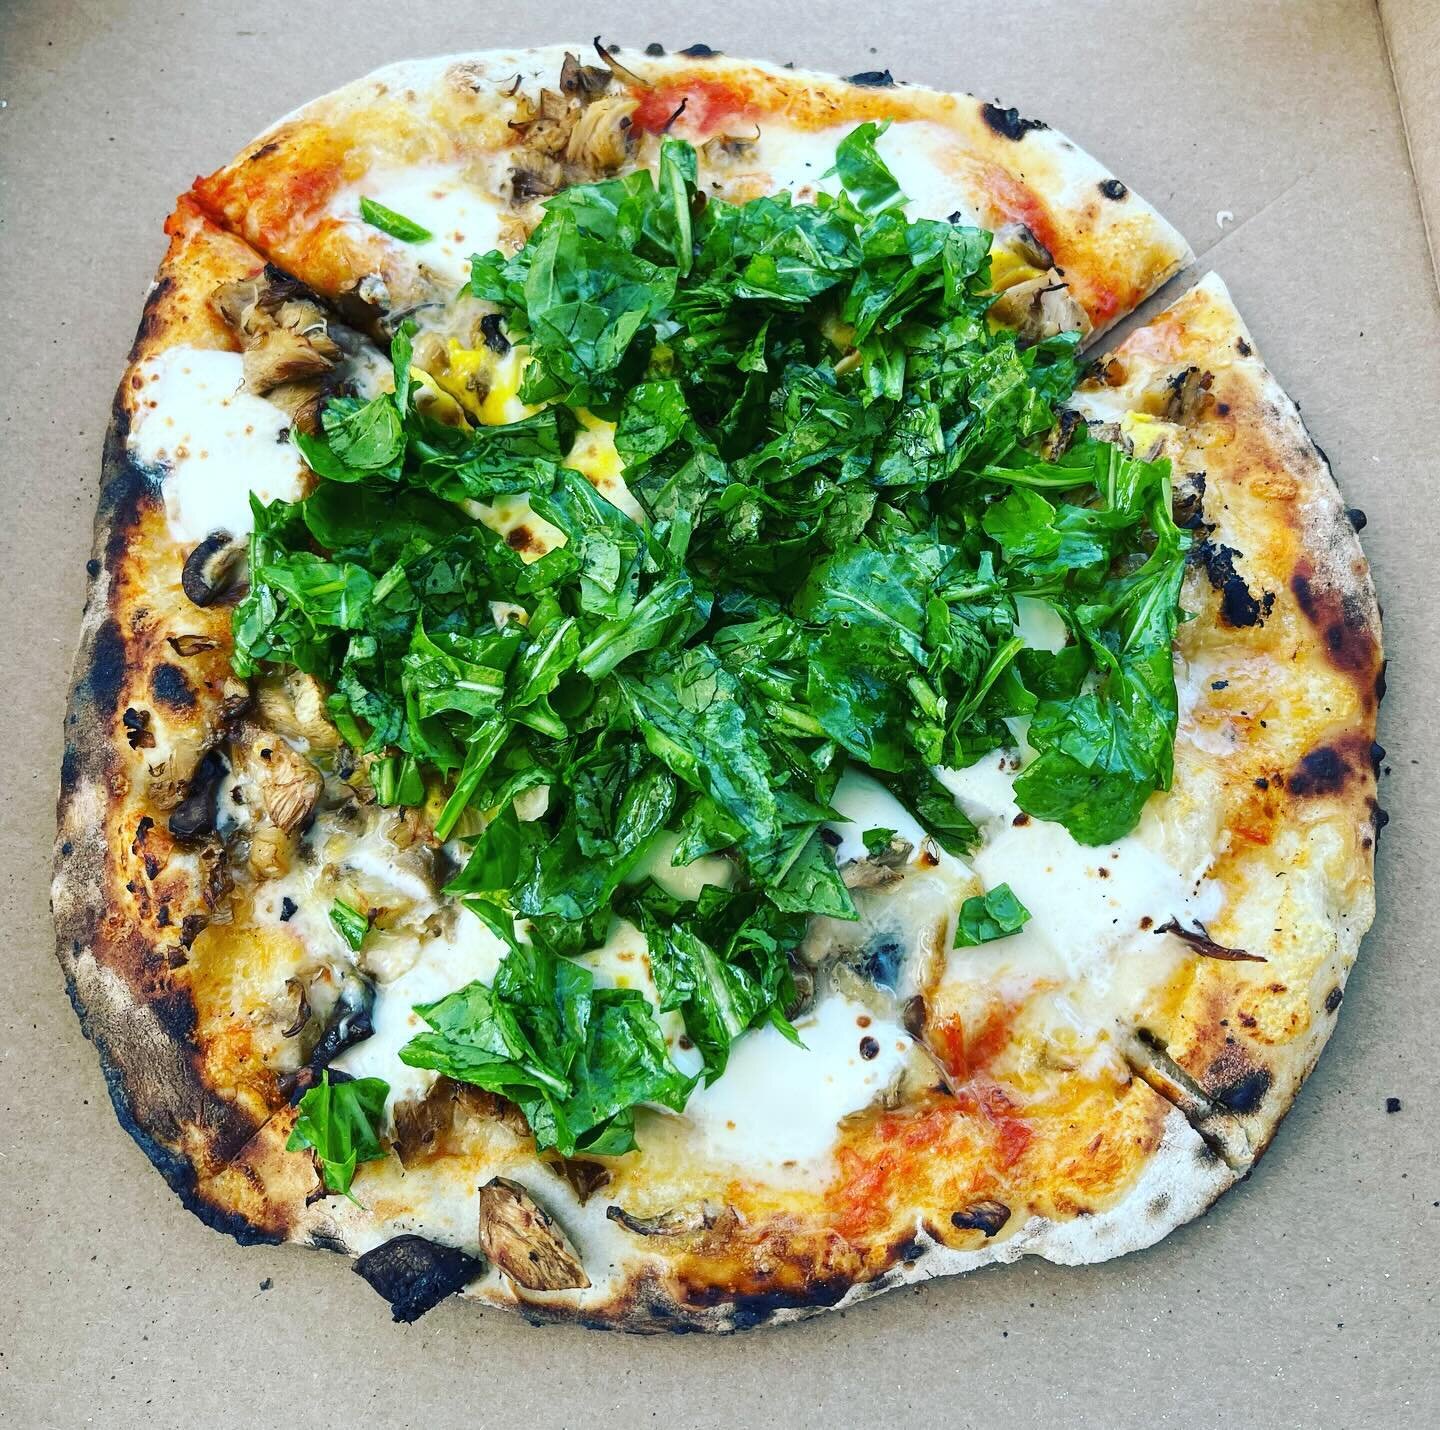 This Saturday 12/16 @farmersmarketatix will be our last market for 2023! To celebrate we will be offering all of our pizzas for $10 to fellow vendors. If you have been wanting to try, this market is the perfect time to try!
.
.
We hope to see you Sat